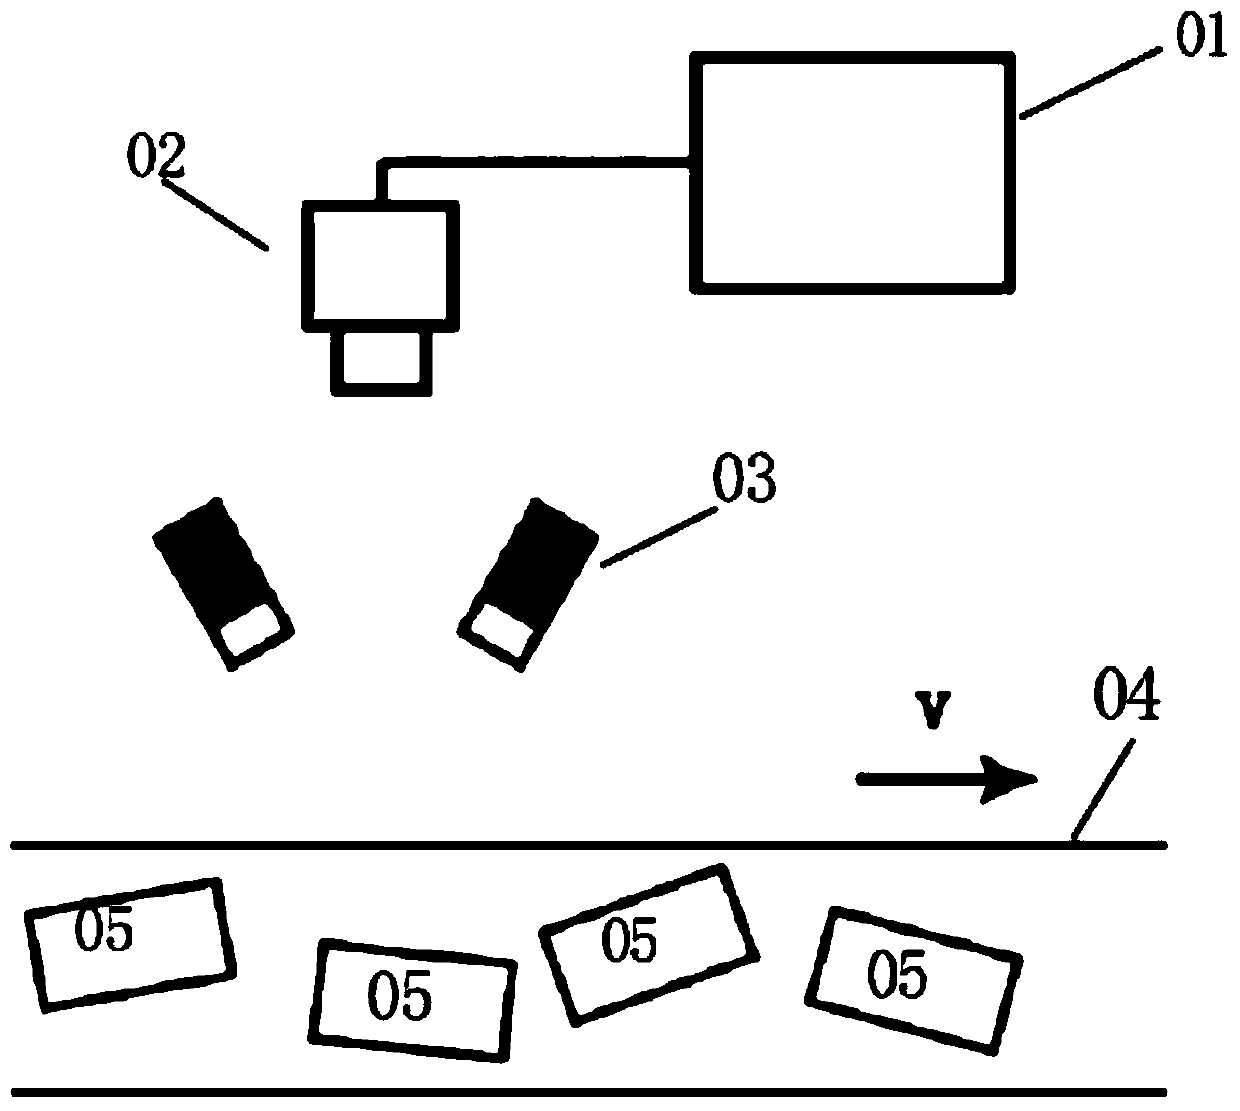 Mechanical arm positioning fetching method based on machine vision